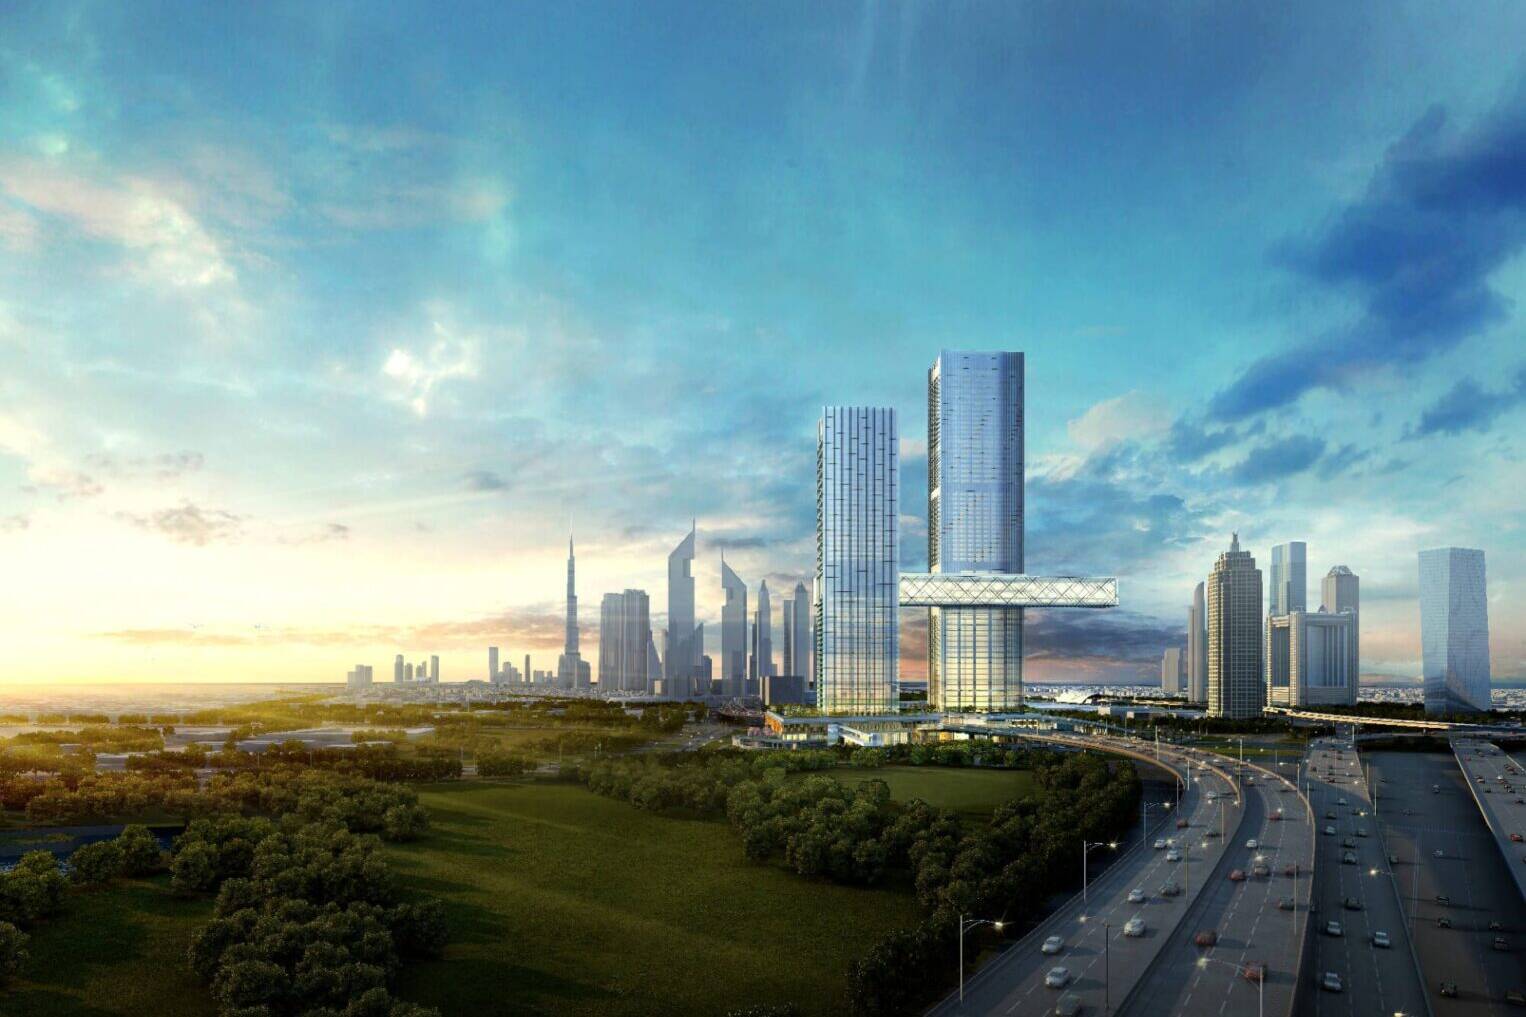 An artist's rendering of a skyscraper in the middle of a city.